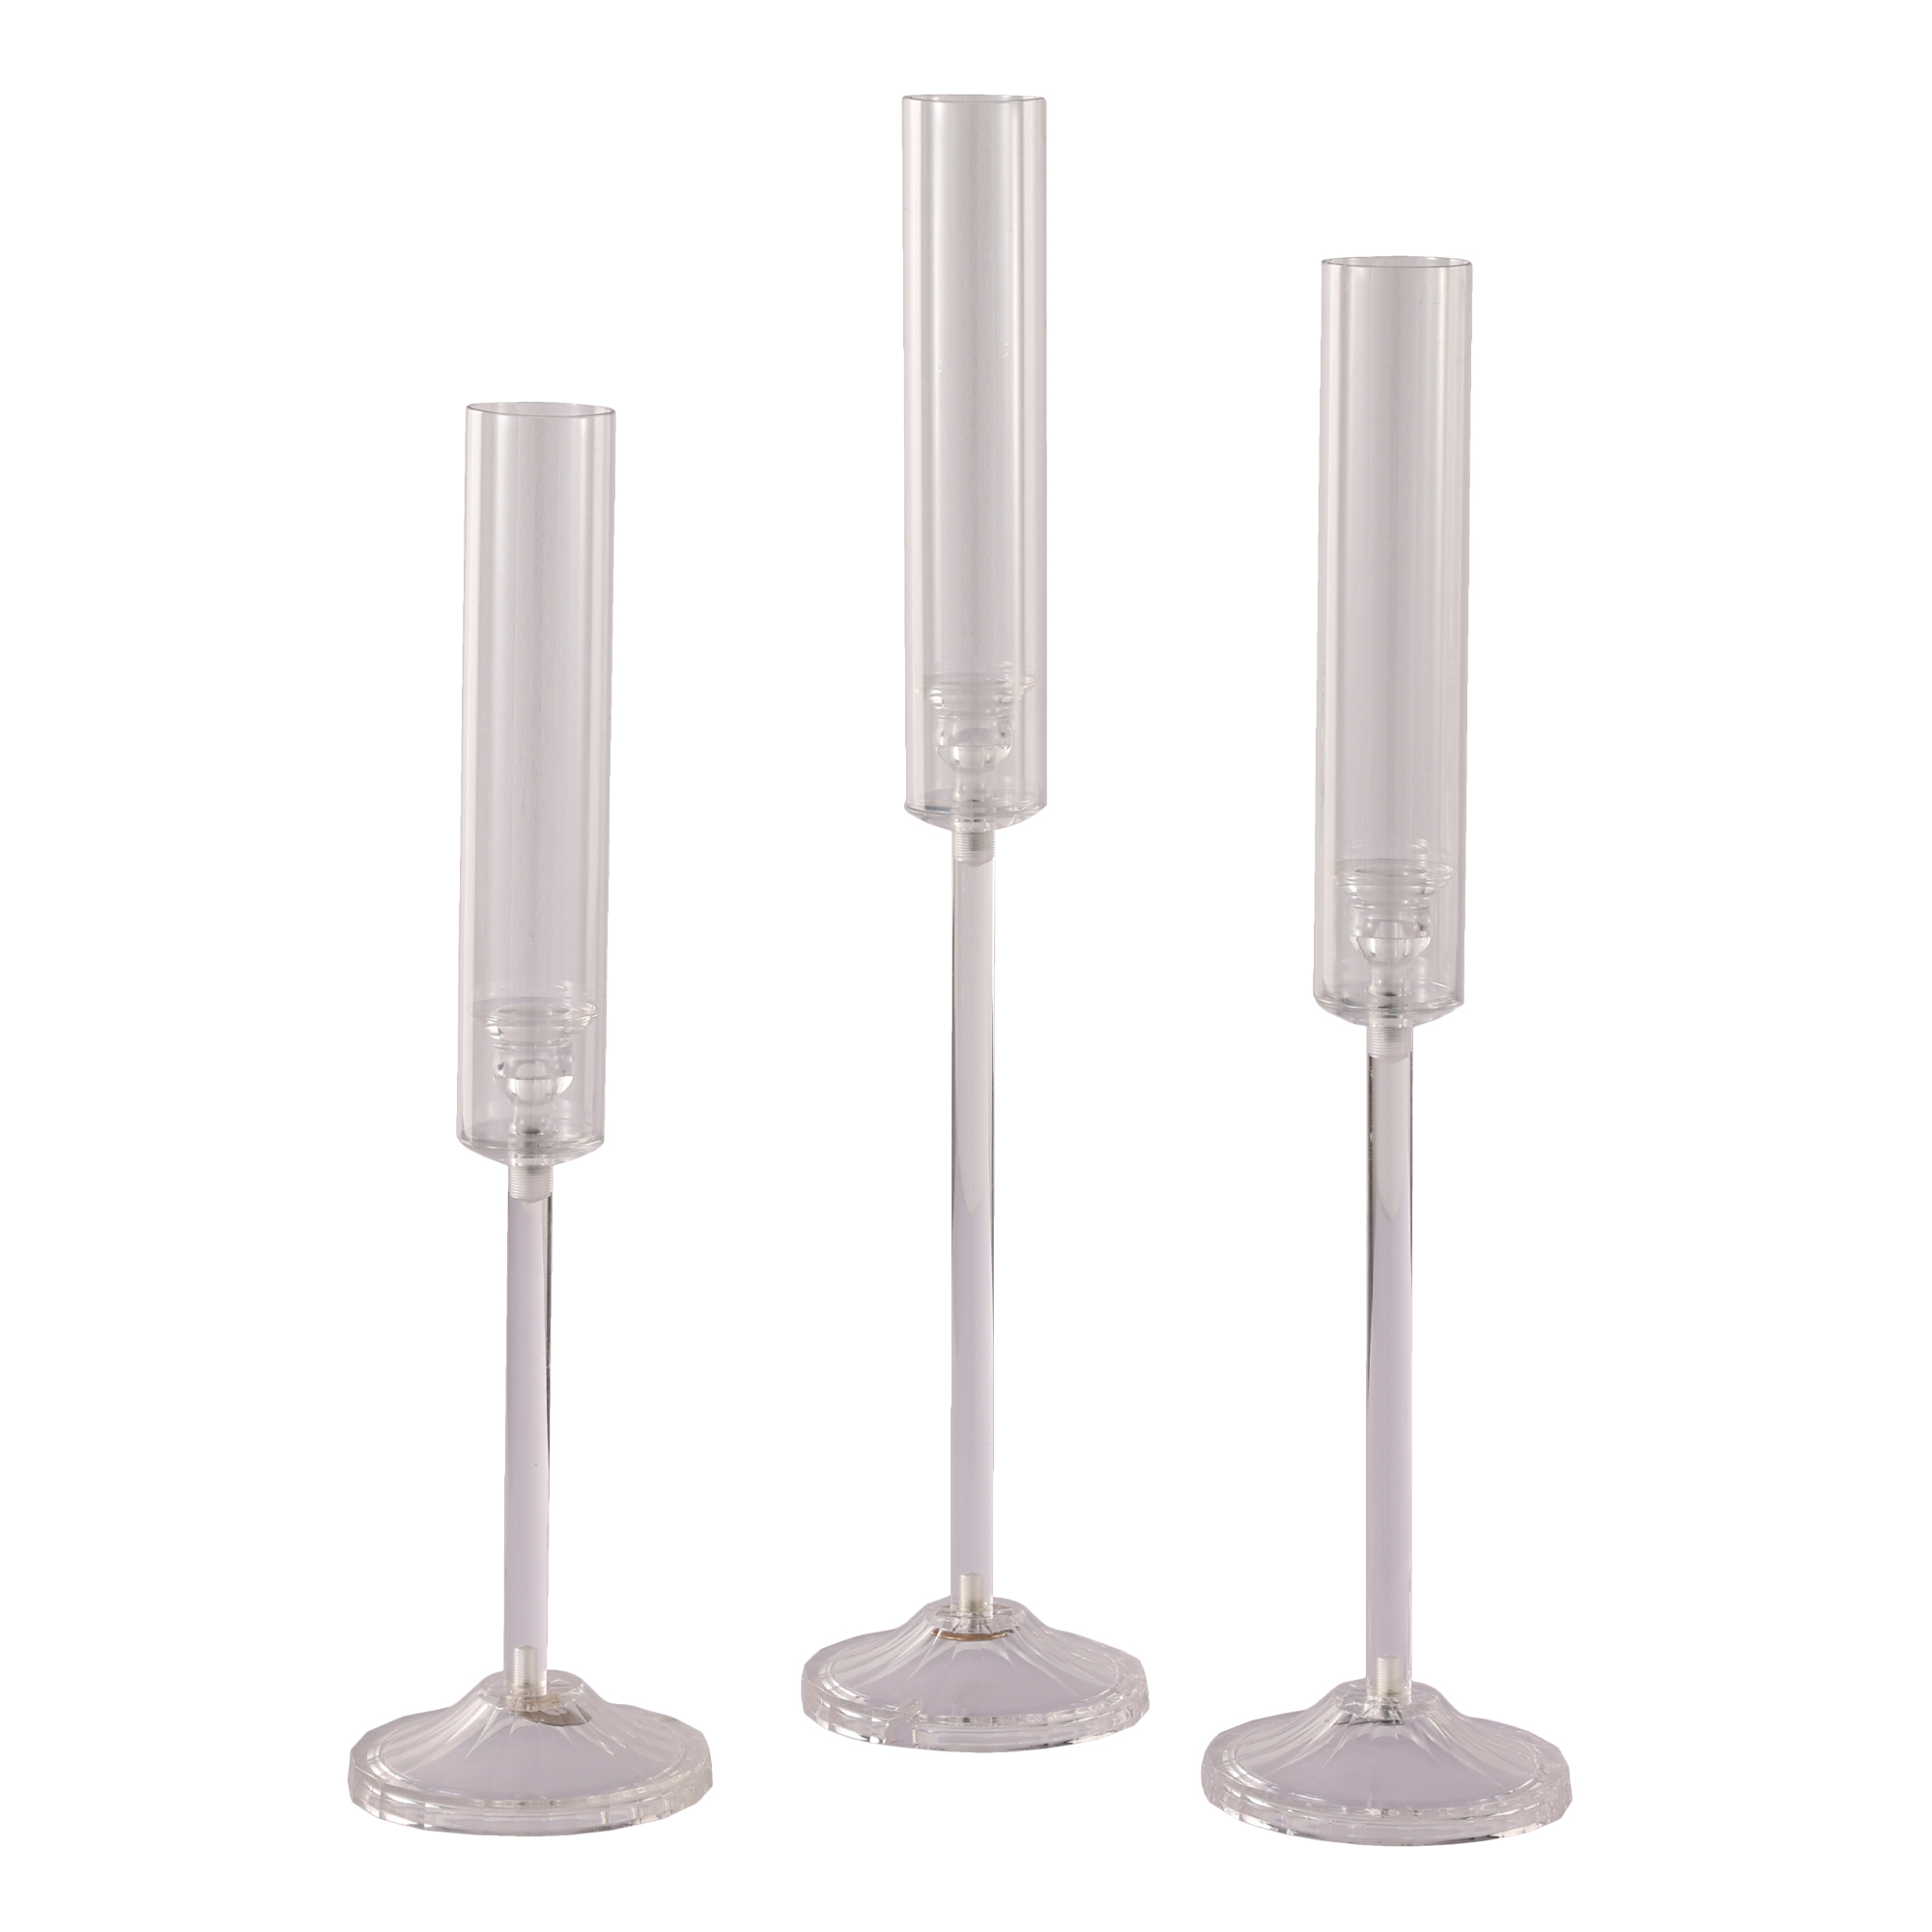 Acrylic Candle Holder with Cylinder Glass Shade 3pc Set